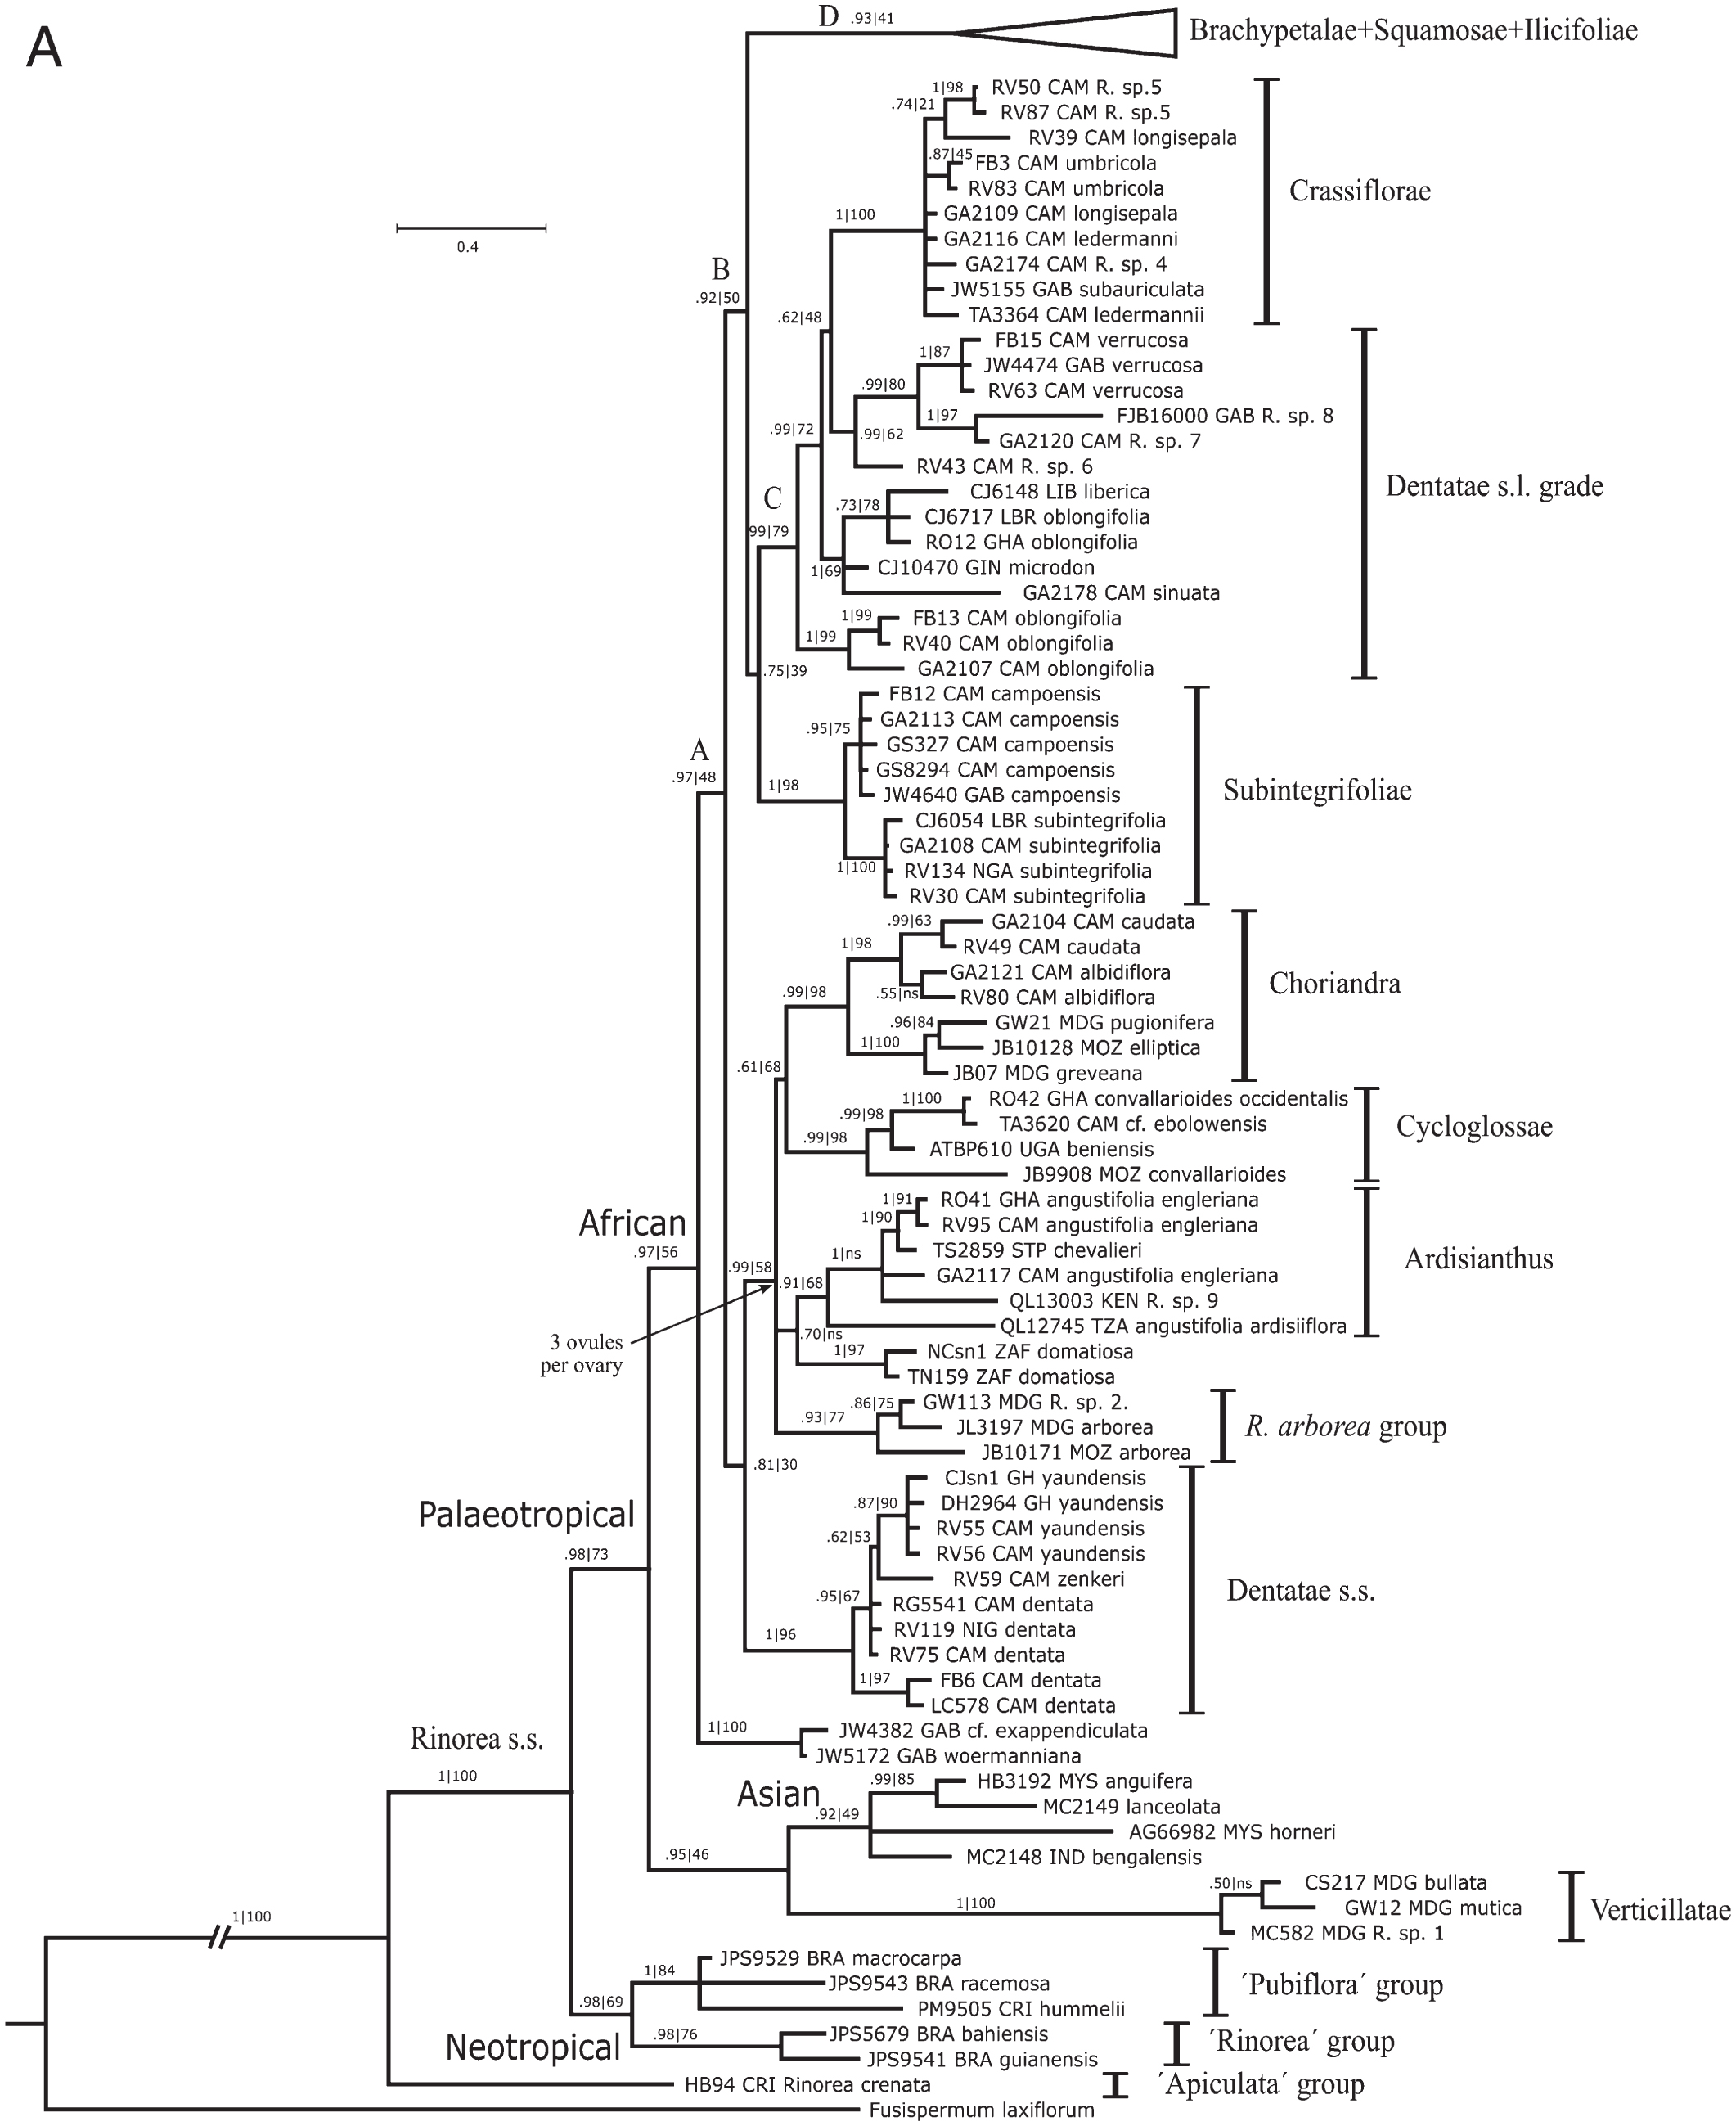 Phylogenetics Of African Rinorea Violaceae Elucidating Infrageneric Relationships Using Plastid And Nuclear Dna Sequences